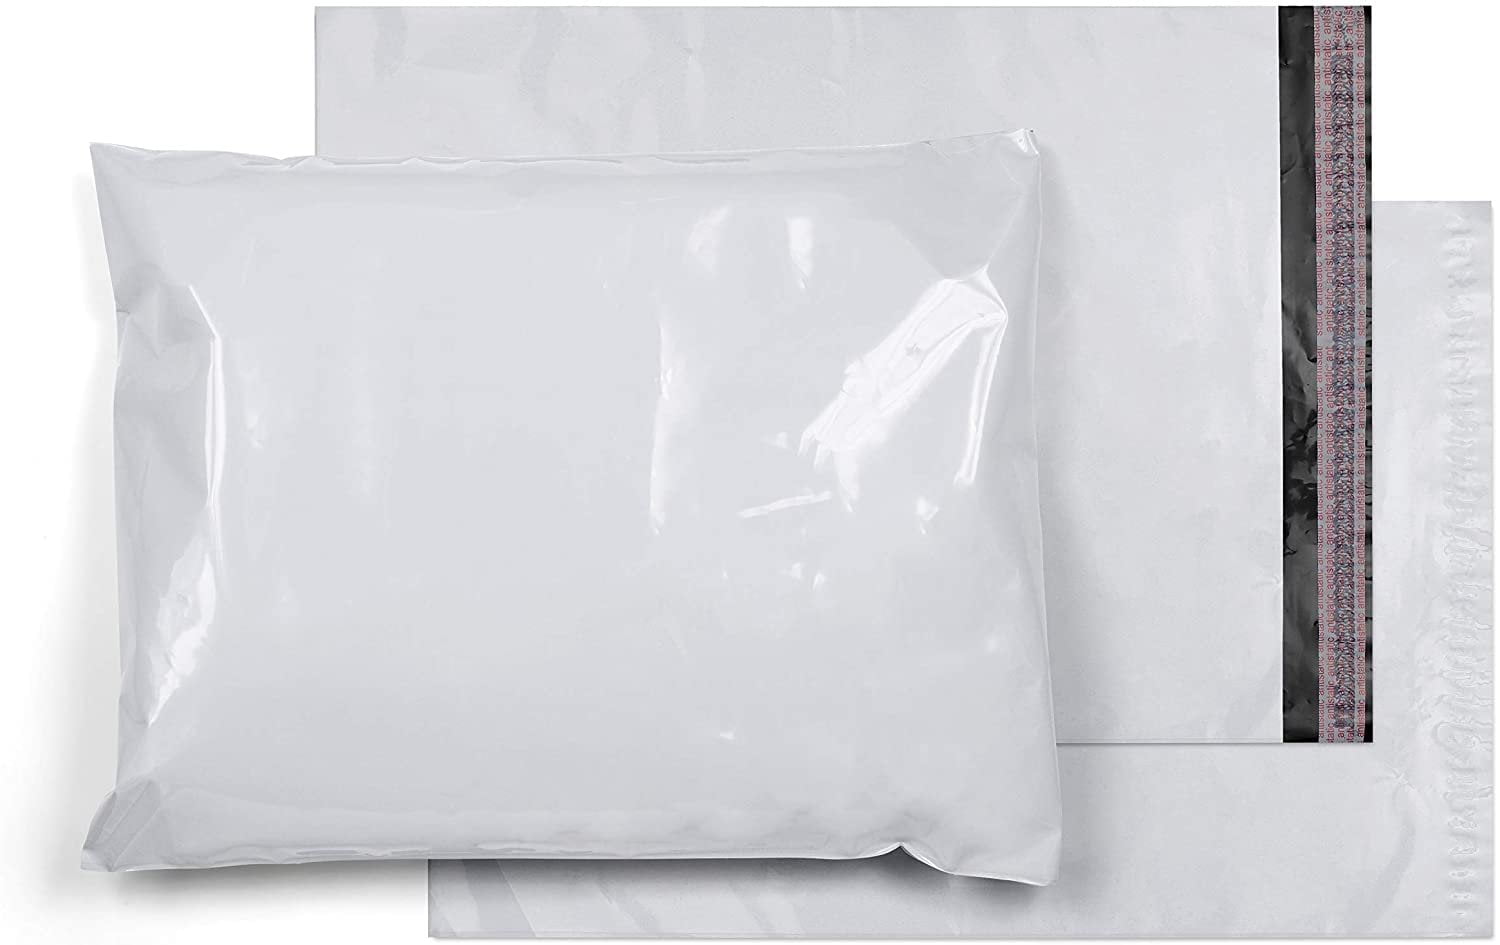 50-19x24 50 6x9 Bags Poly Mailers Plastic Shipping Envelopes Self Sealing Bag 